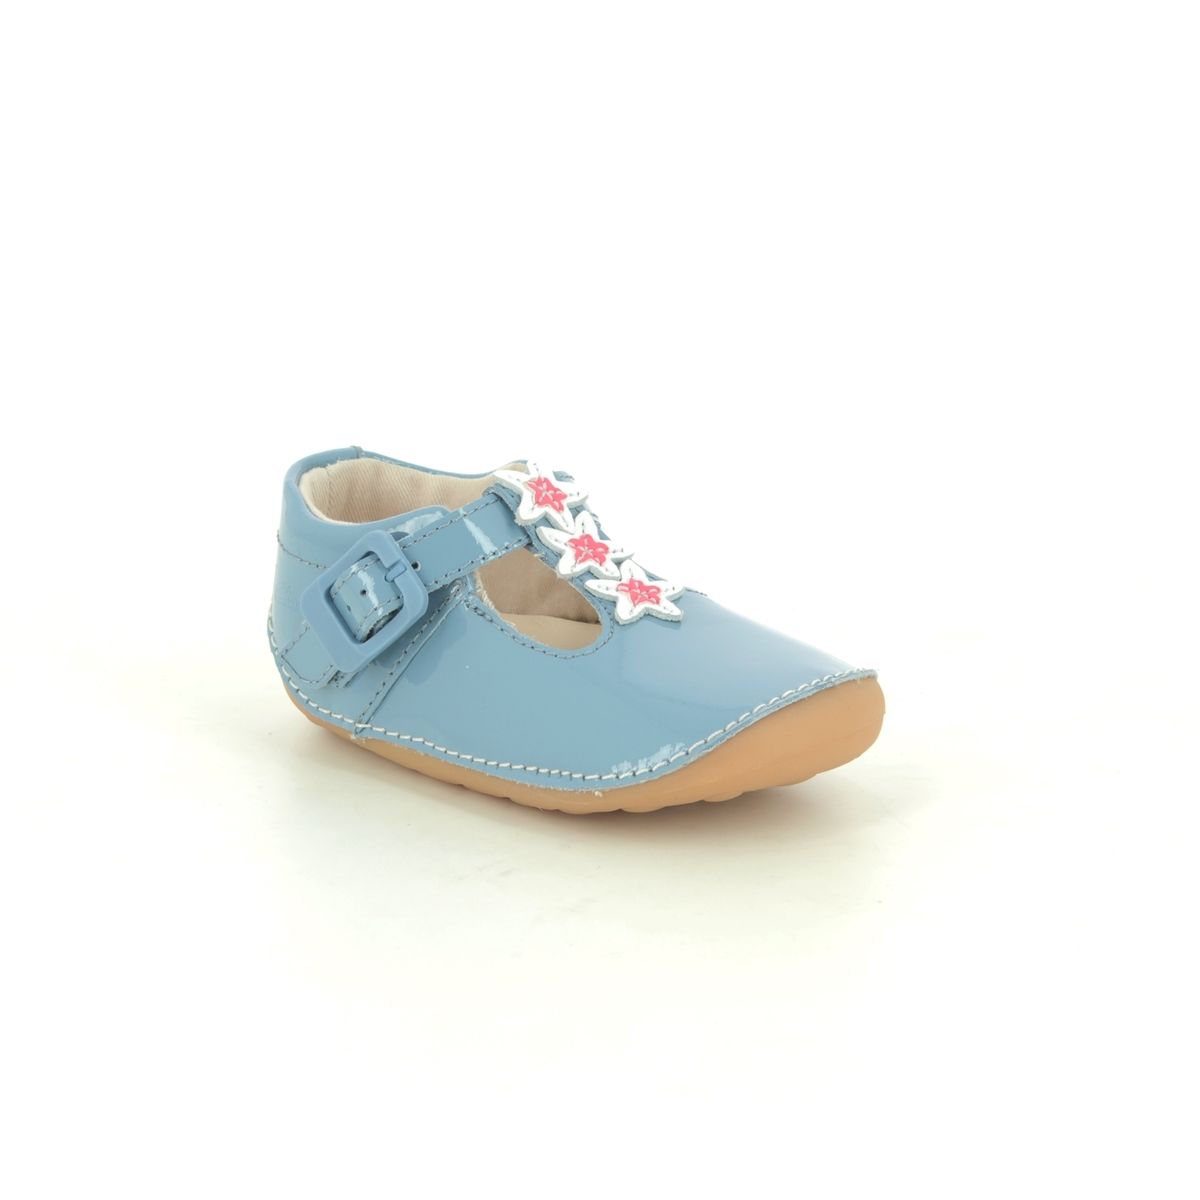 Clarks Tiny Flower T Blue Kids girls first and baby shoes 5763-76F in a Plain Leather in Size 2.5